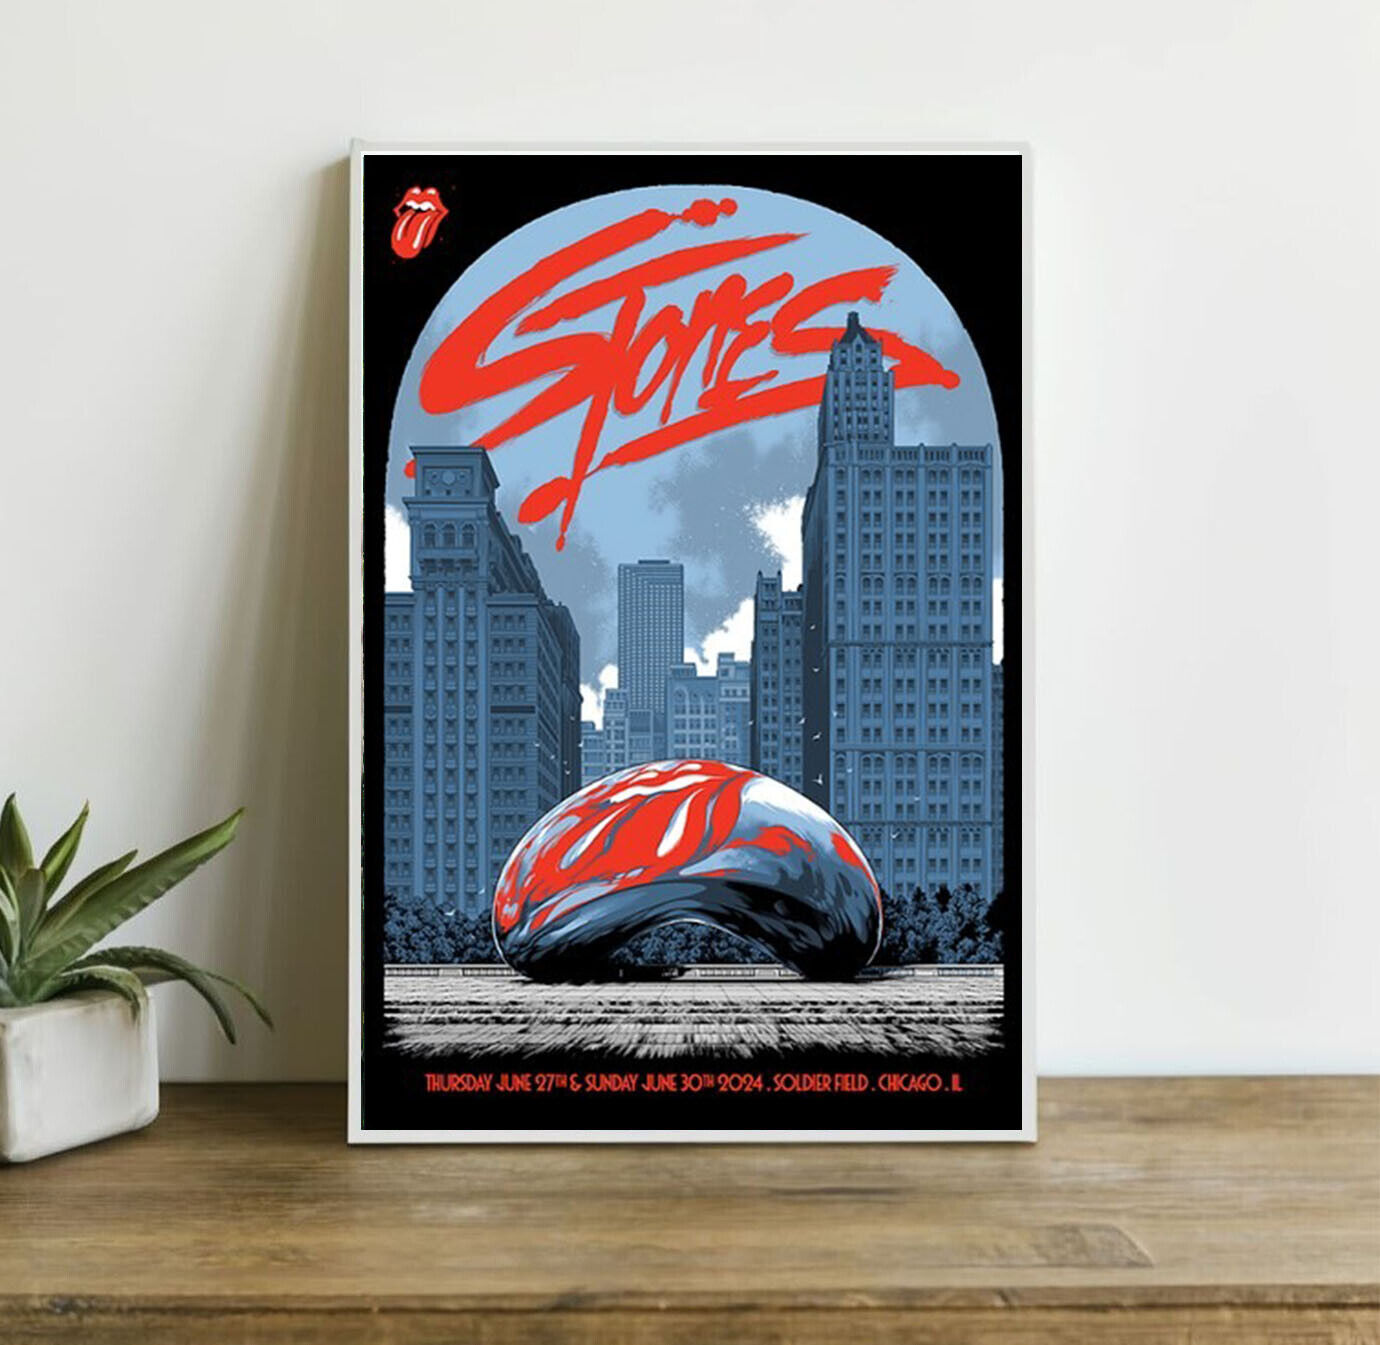 The Rolling Stones June 27 & 30 2024 Soldier Field Chicago IL Poster